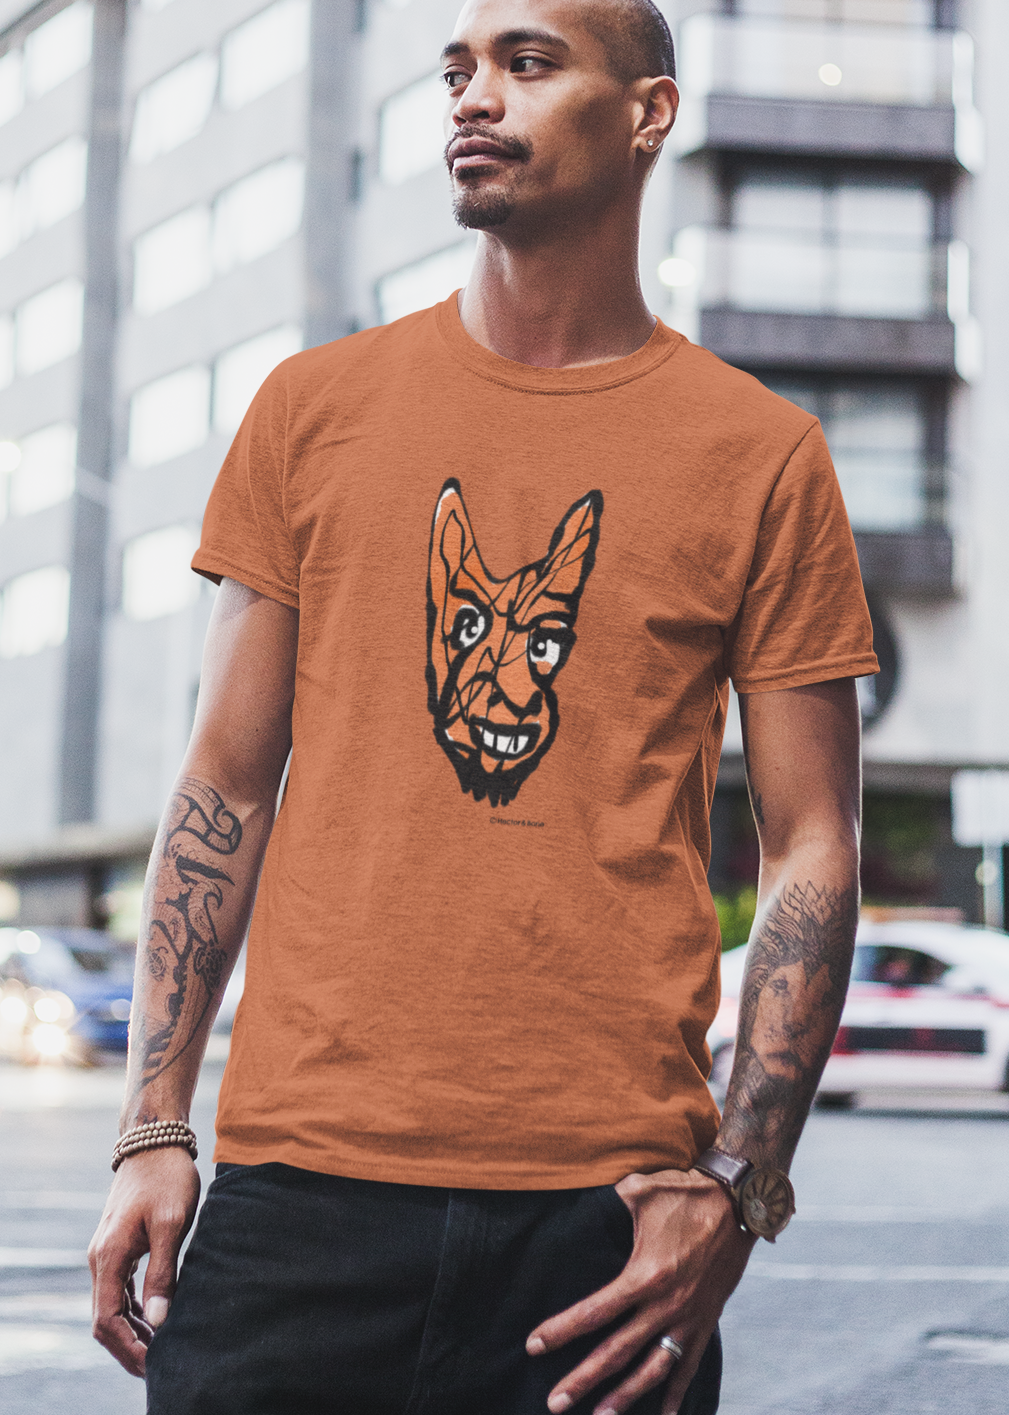 Devil T-shirt - Young man wearing Cheeky Little Devil illustrated orange vegan cotton t-shirts by Hector and Bone